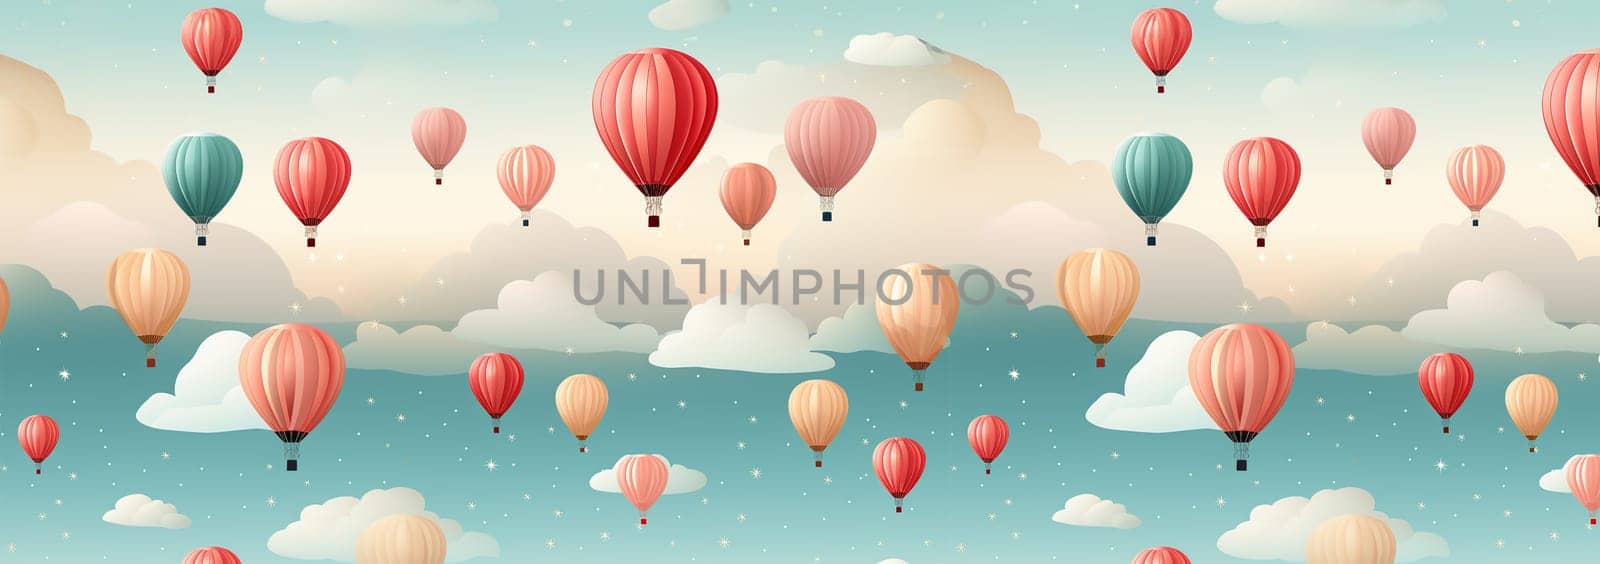 Cute pastel colored Boho seamless pattern with hot air balloons and clouds. Hand drawn balloon in the sky.Pastel neutral shades. Cute baby background. Funny decor for nursery, textiles, clothing, packaging, interior. Copy space